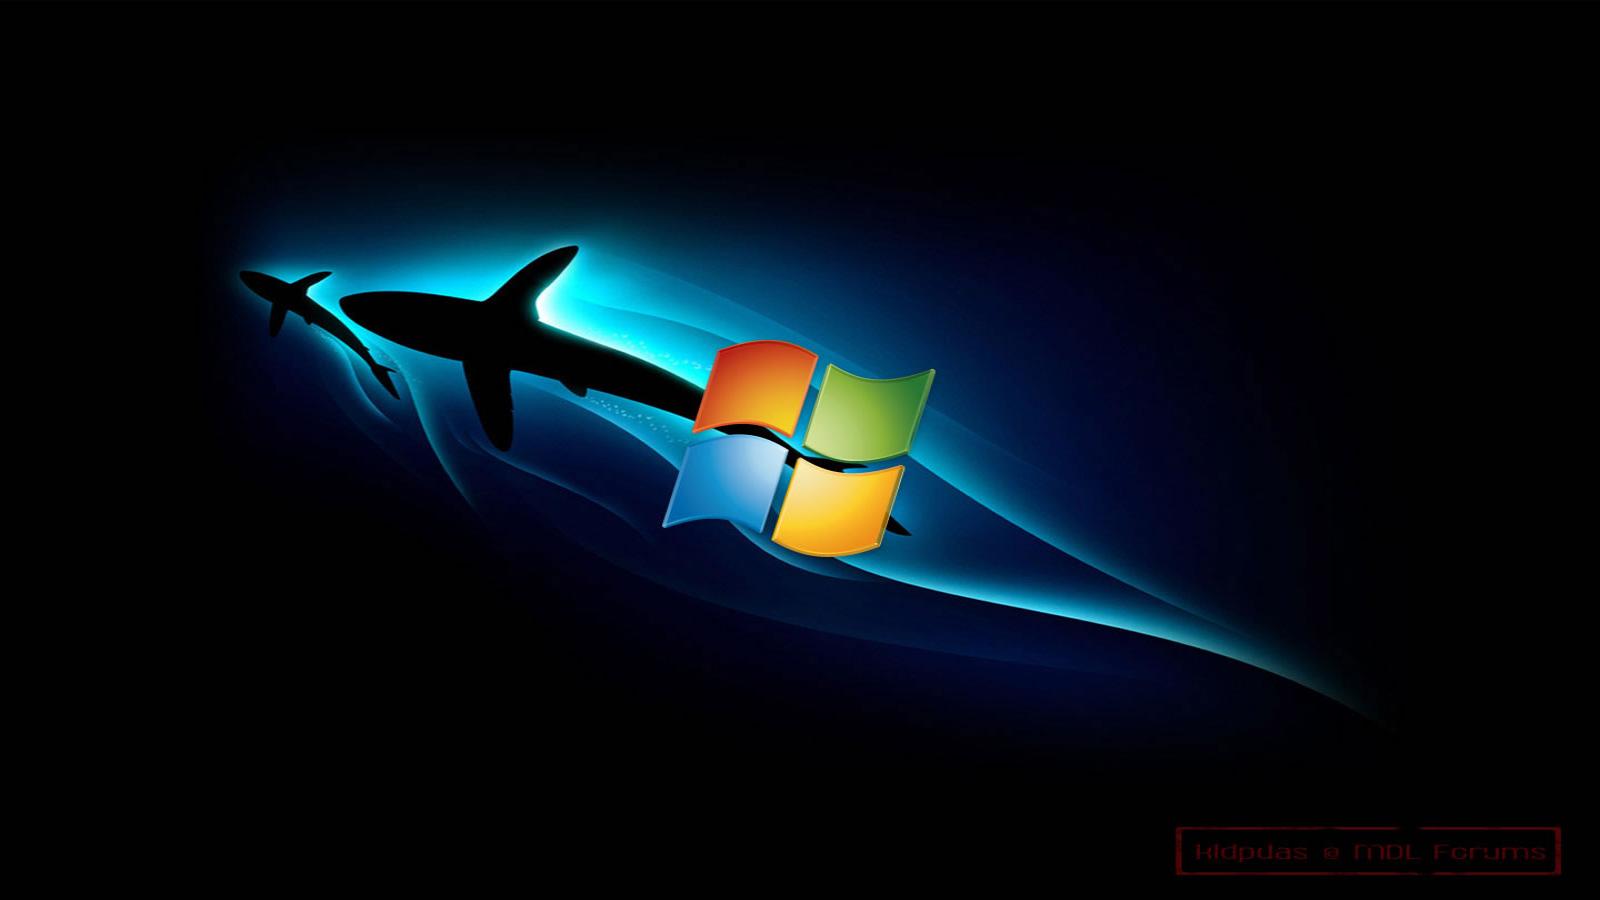  Windows 8 HD Wallpapers 1600x900 Other Wallpapers 1600x900 Download